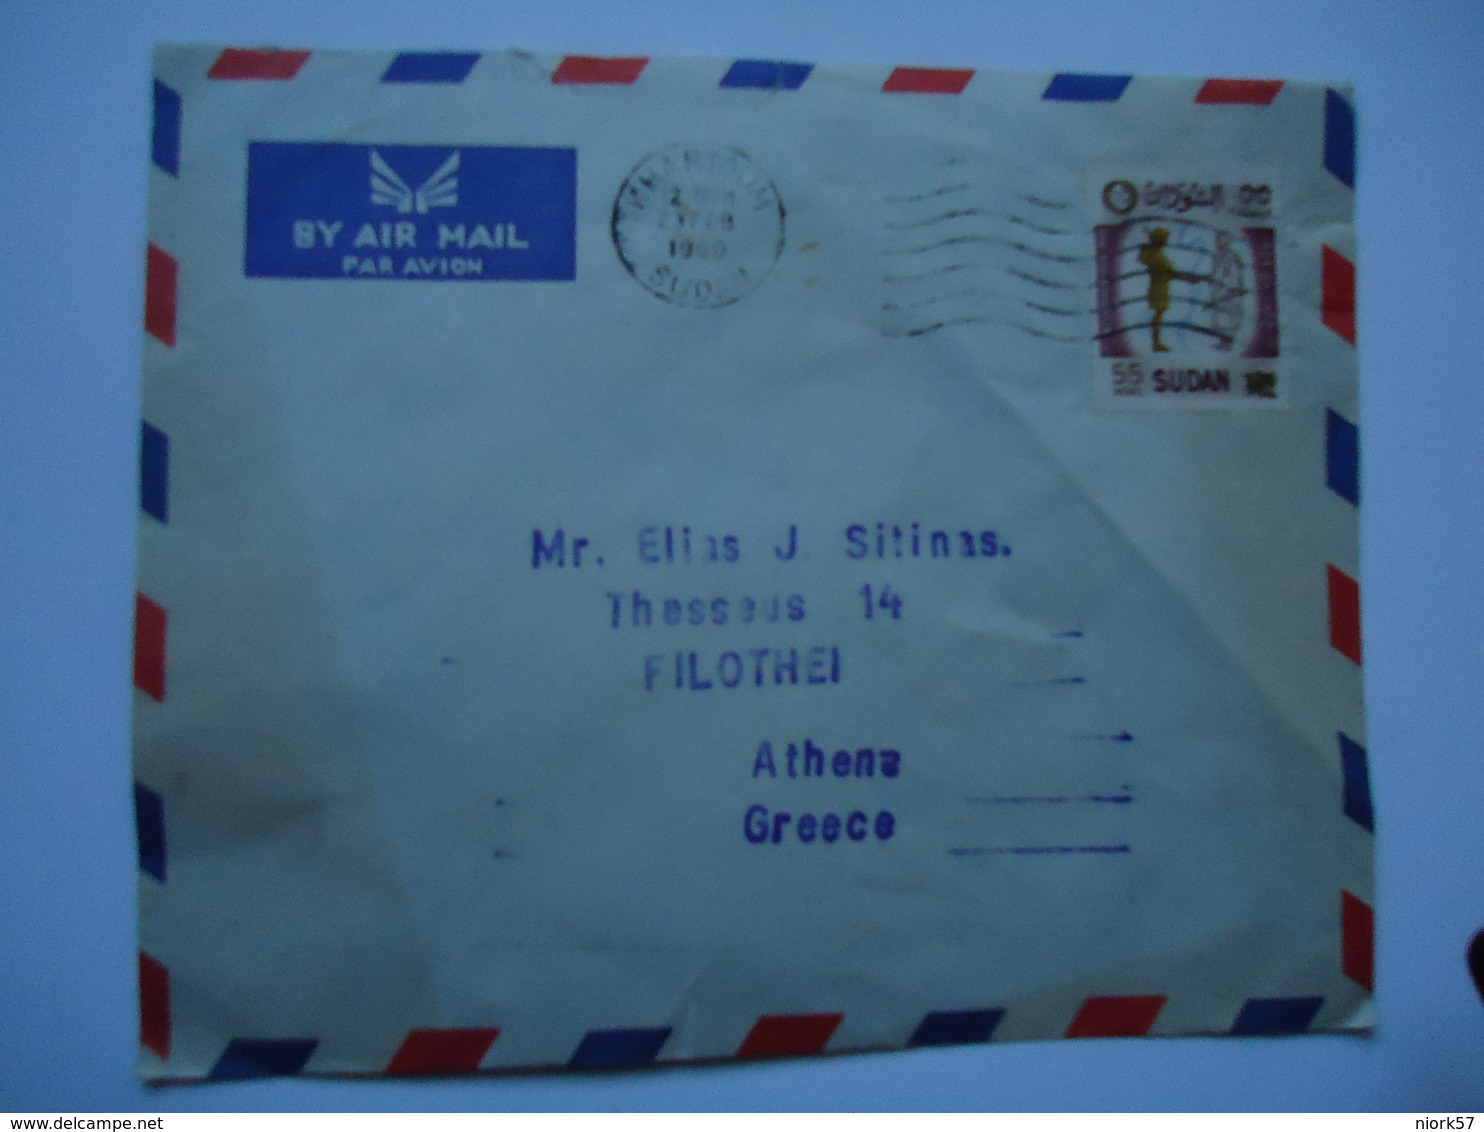 GREECE SUDAN  COVER  1960  WITH POSTMARK POSTED  GREECE ATHENS XALADRION AND SLOGAN - Maschinenstempel (Werbestempel)